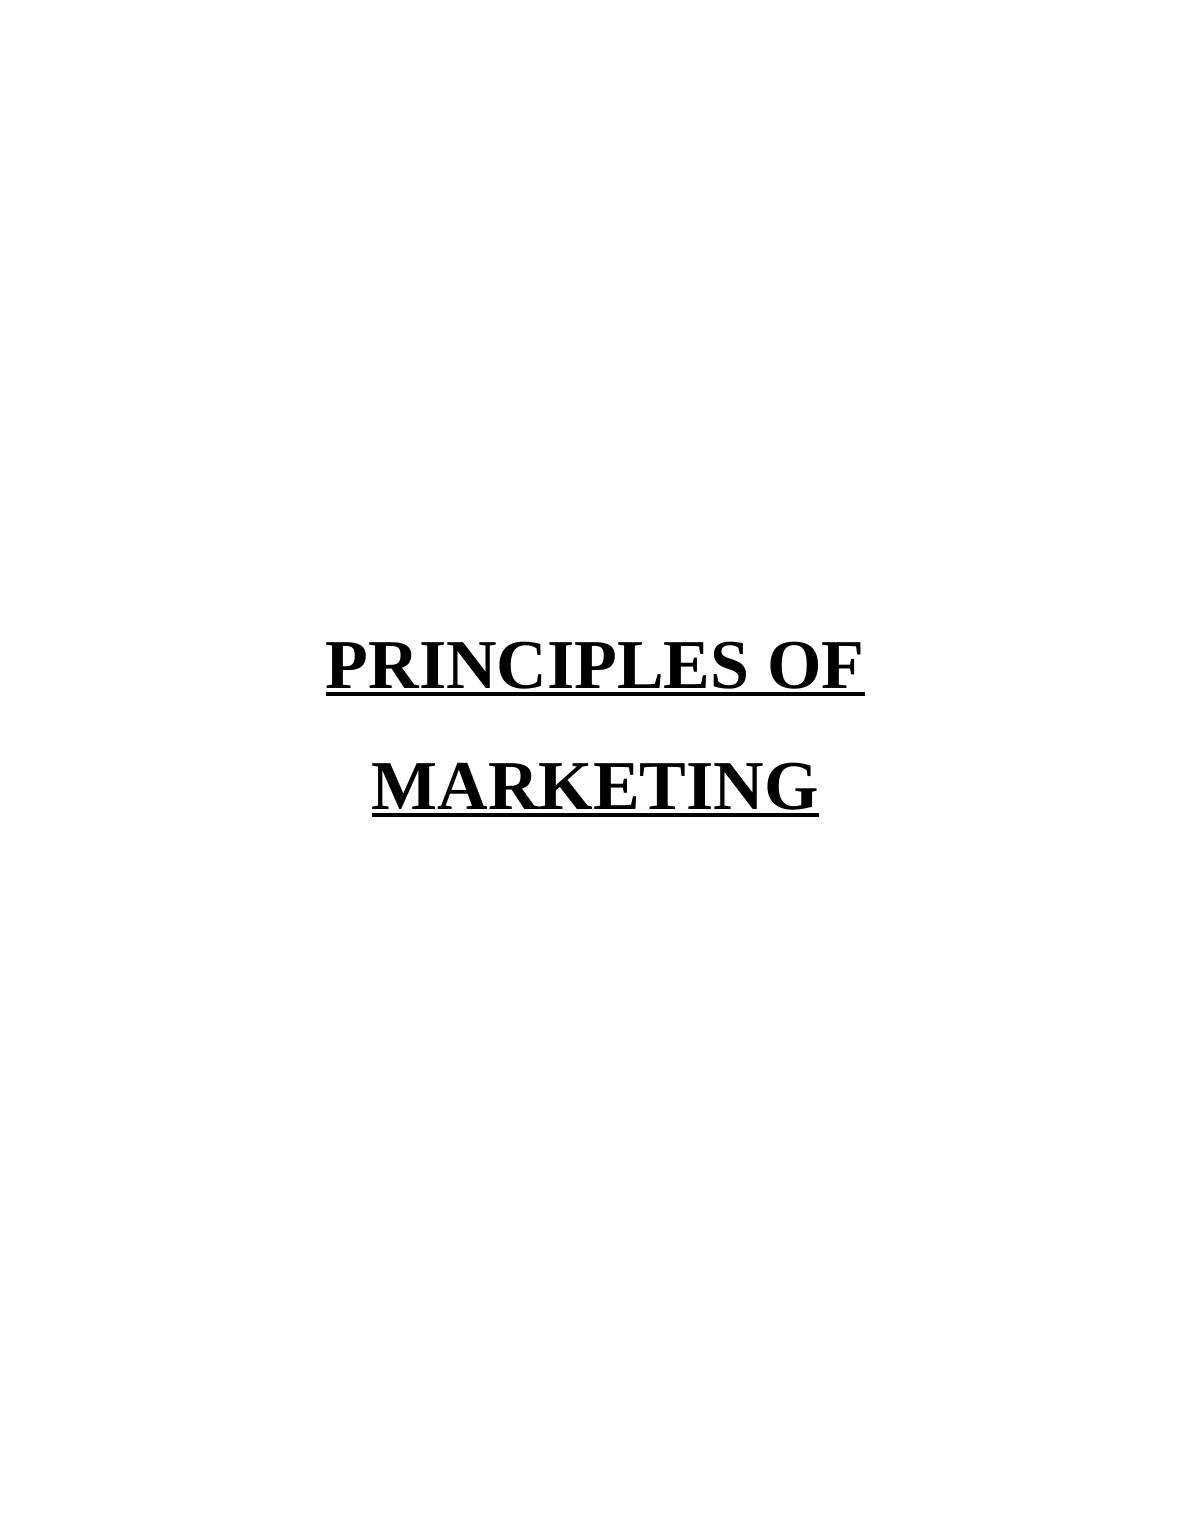 Principles of Marketing of Apple and Fitbit_1